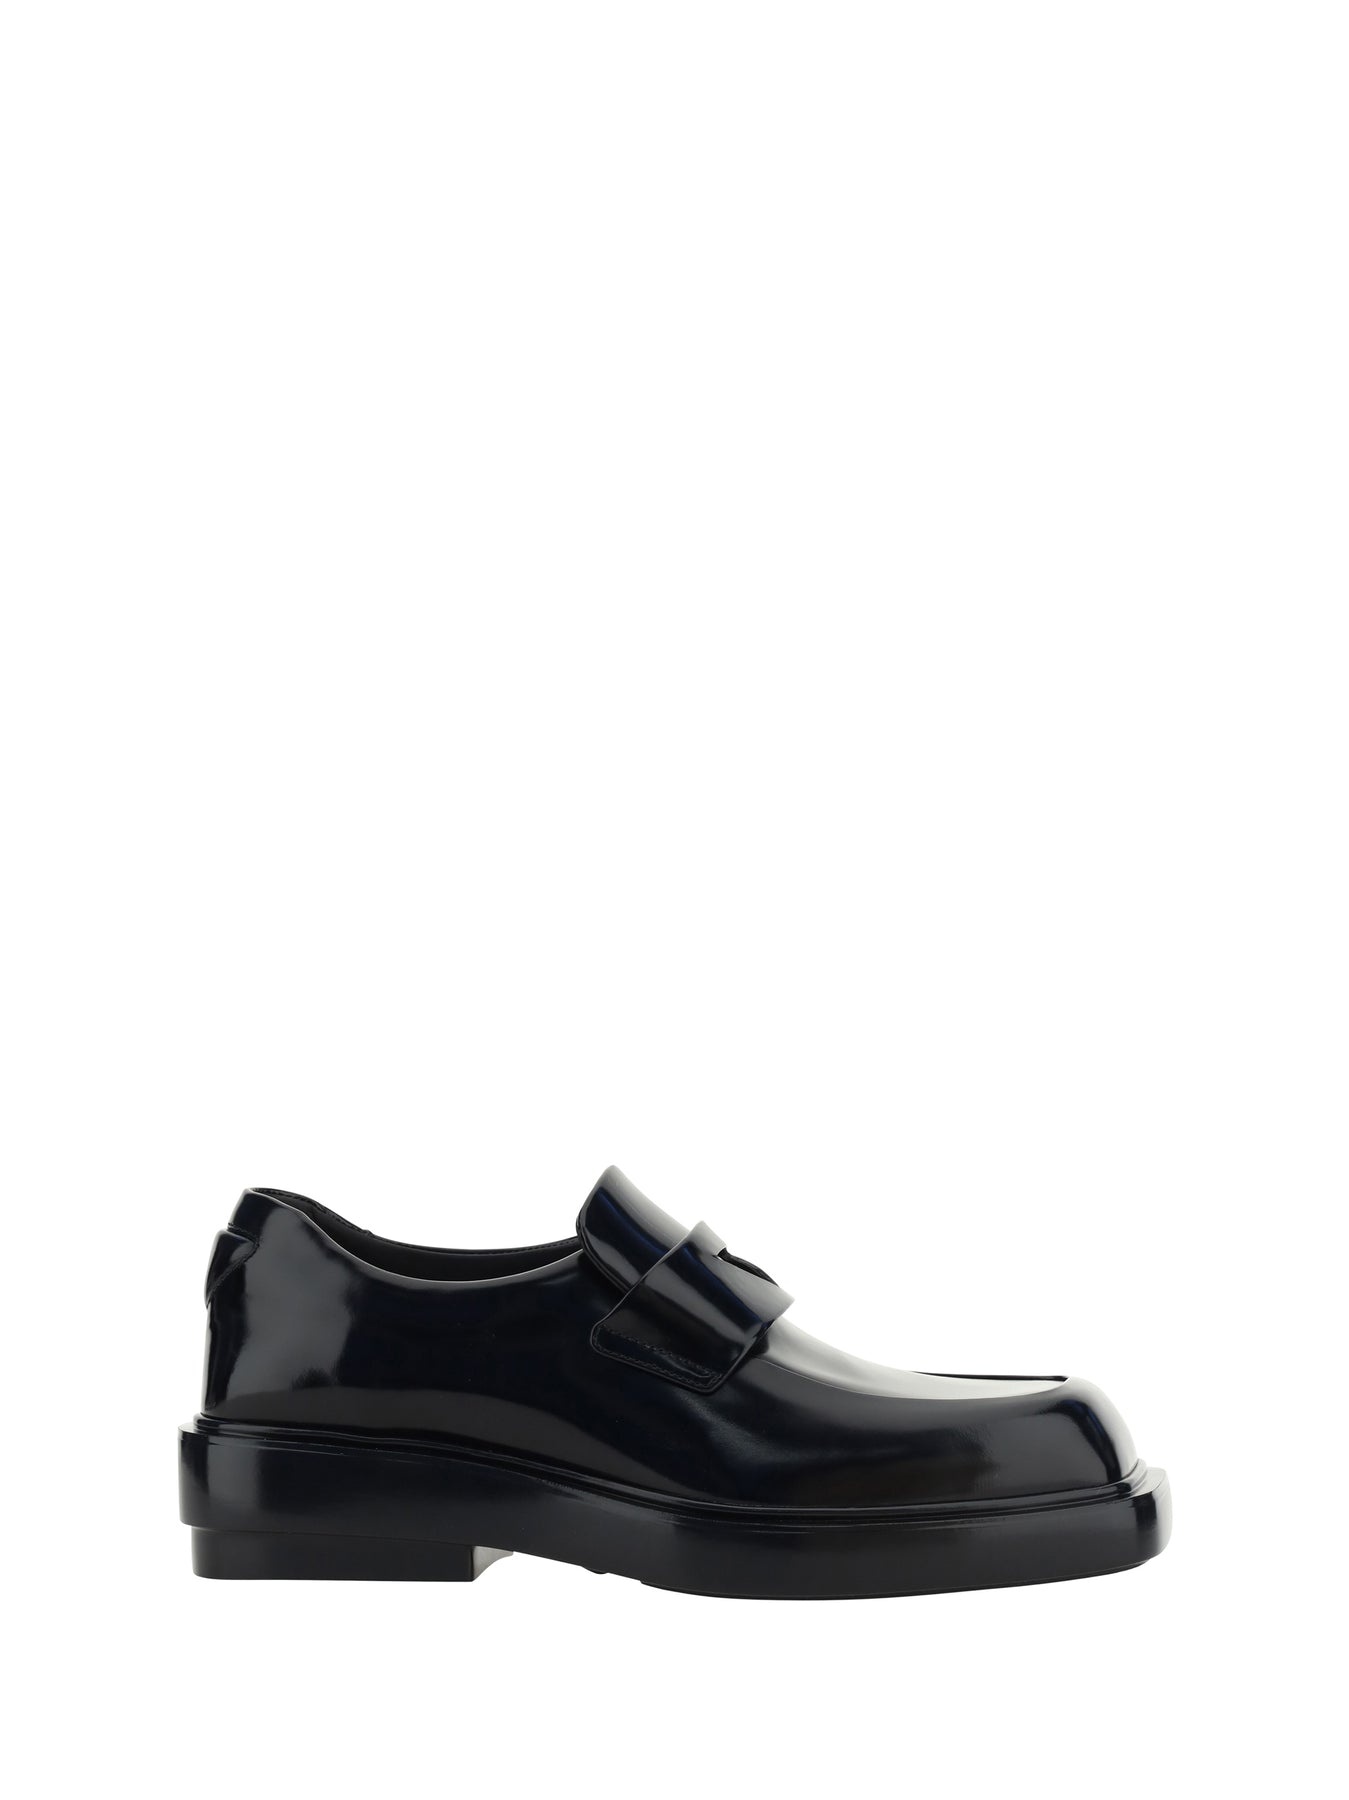 LOAFER SHOES - 1